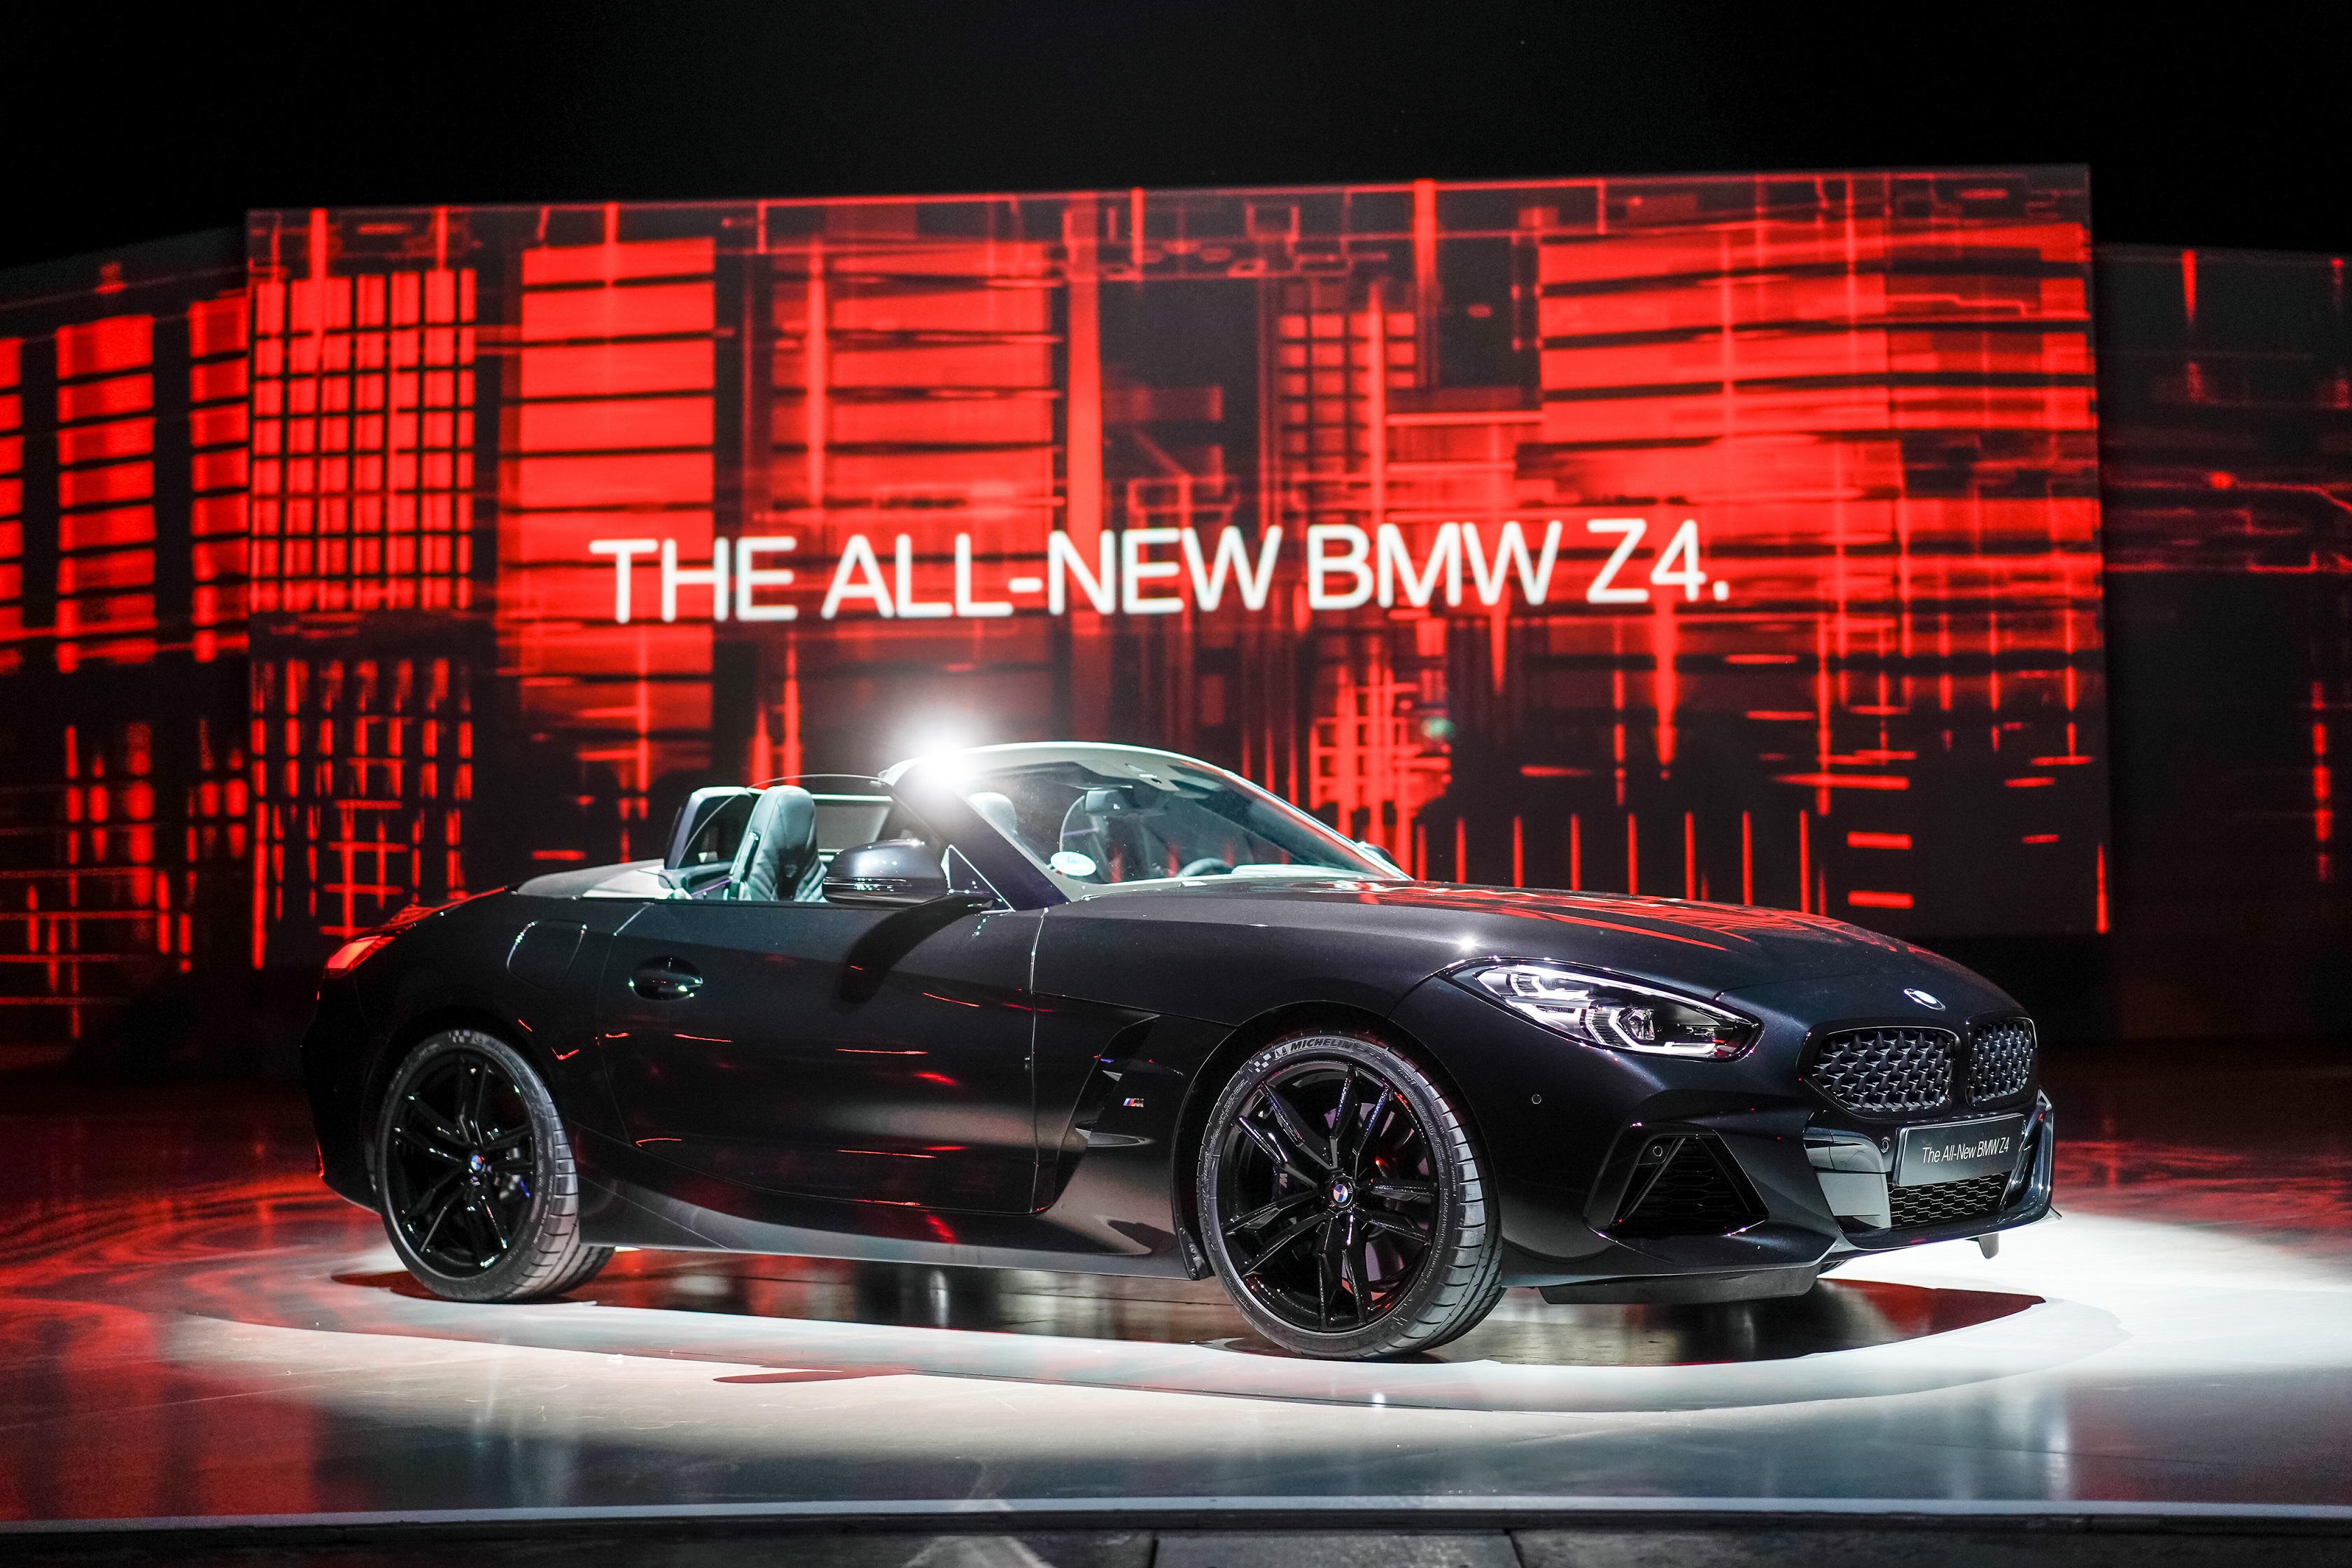 The All New Bmw Z4 (1)